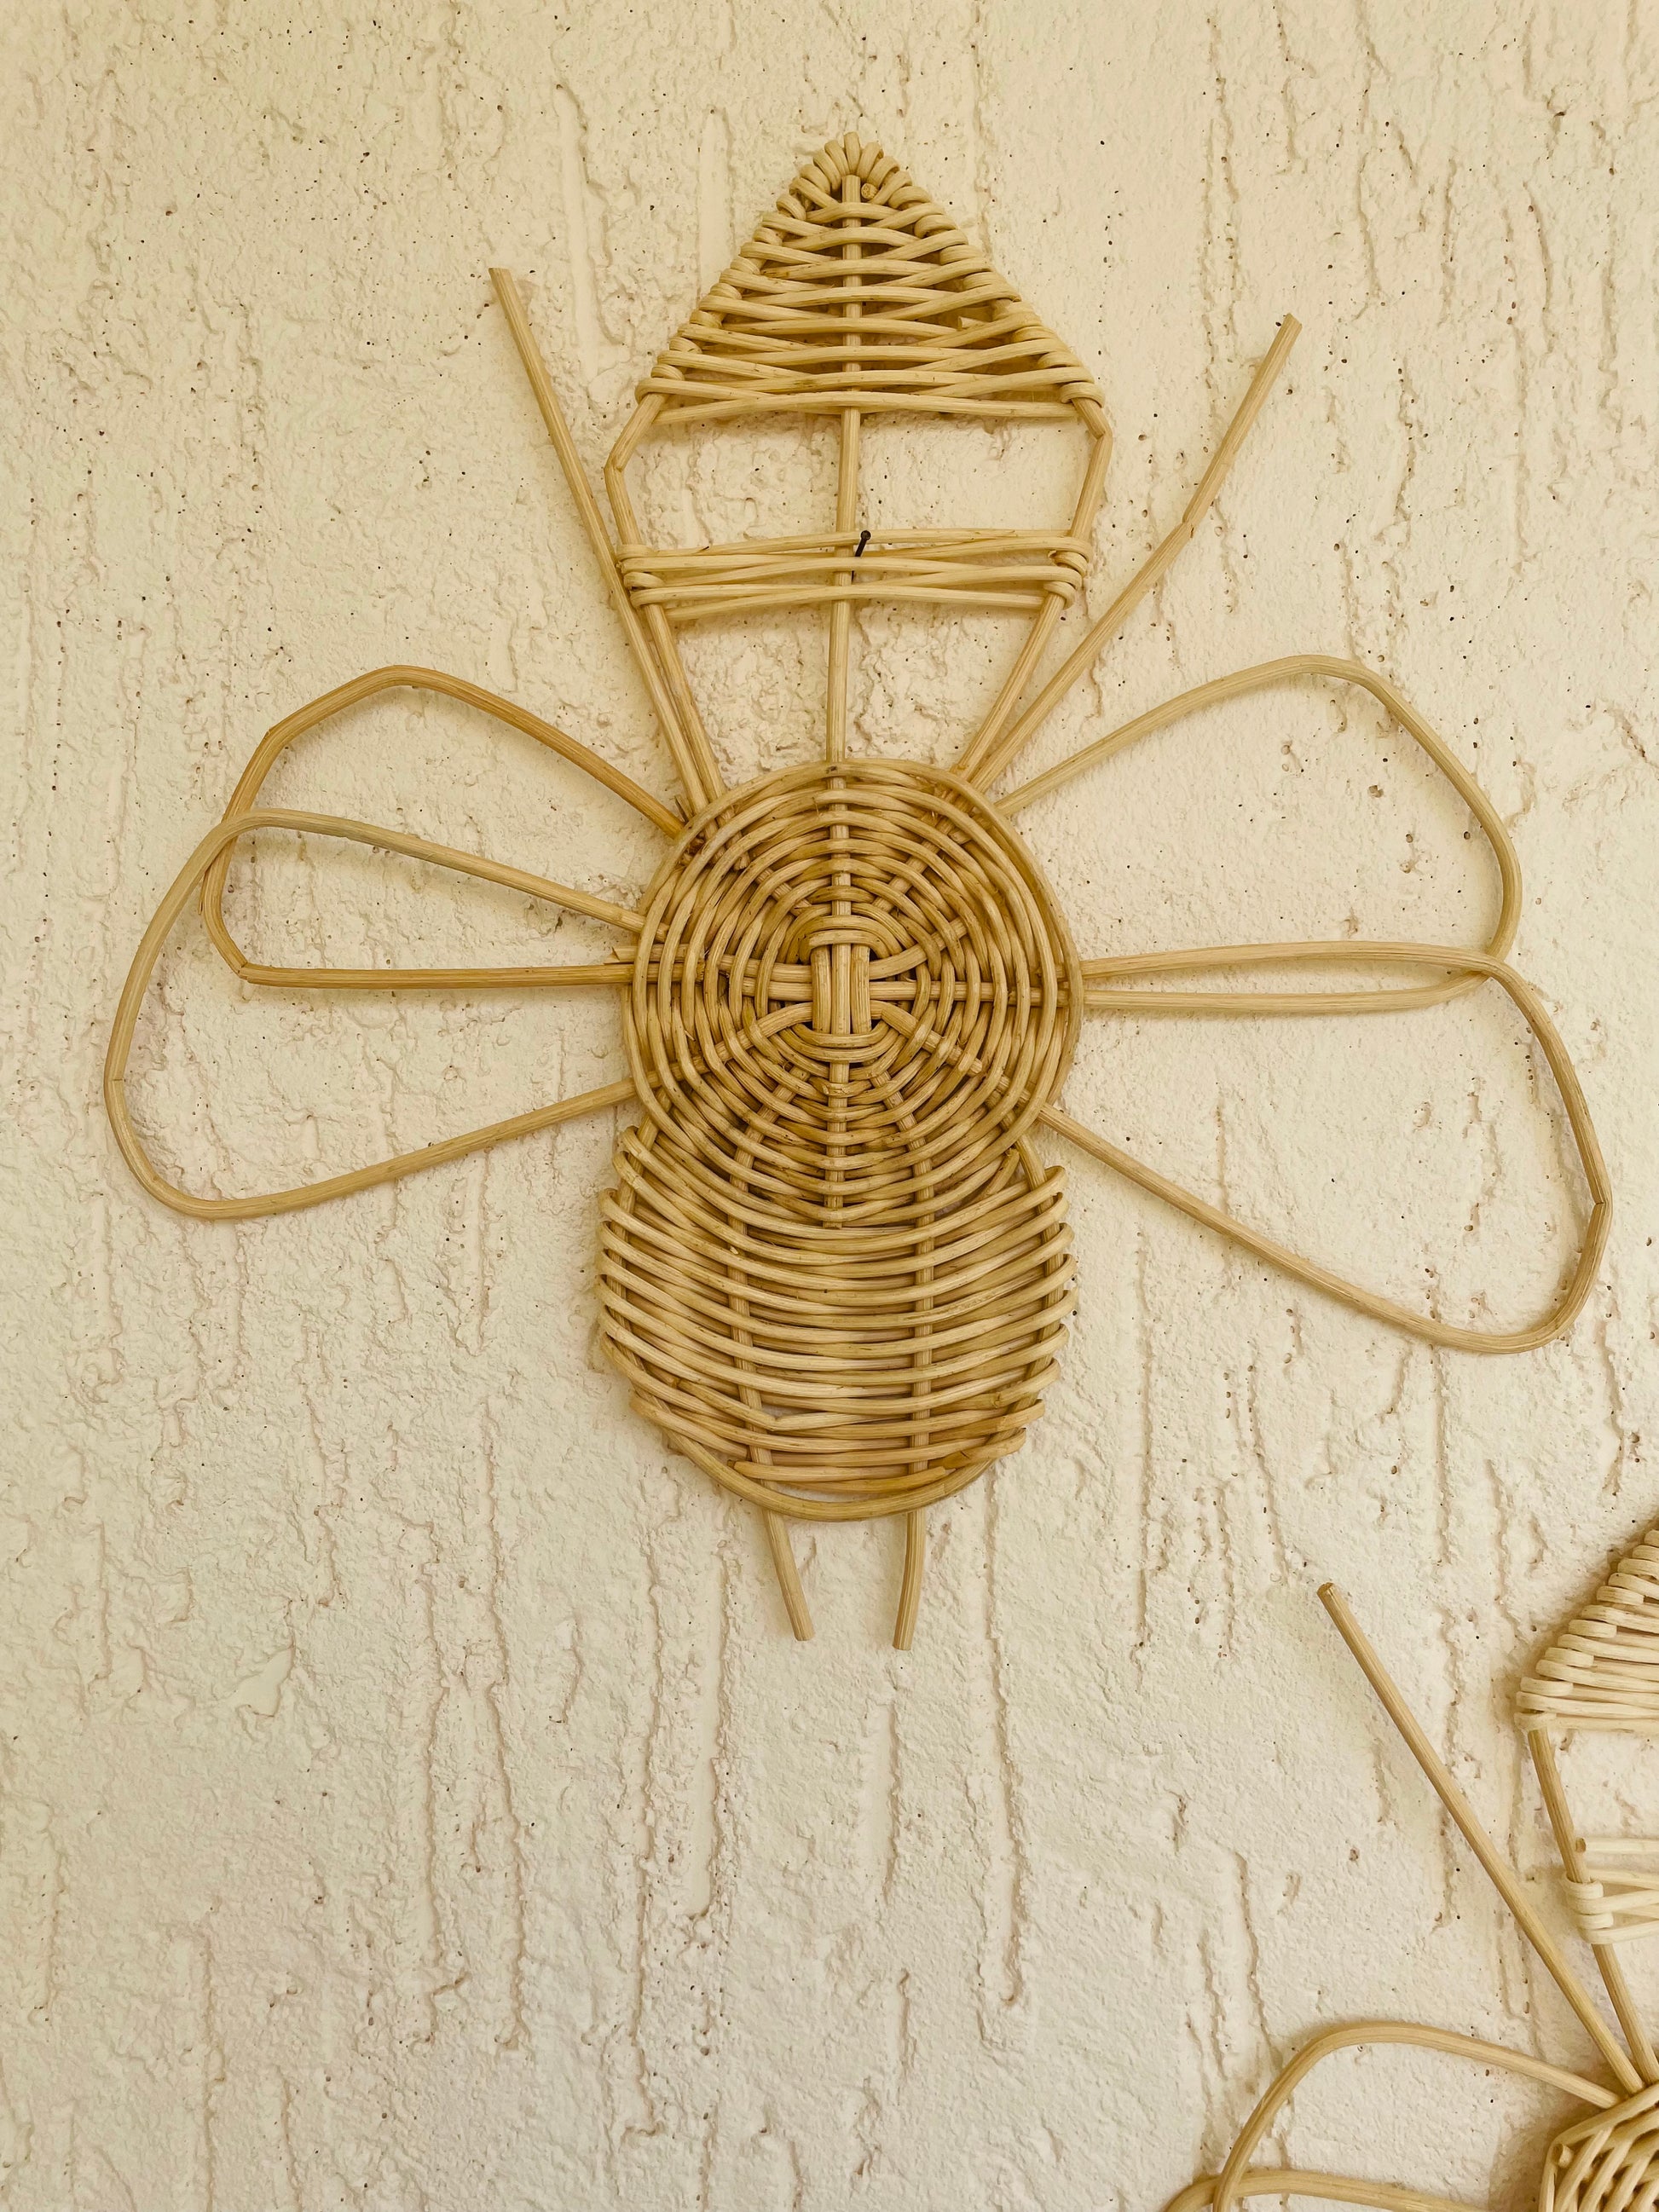  Bees cane wall décor, Bohemian wall art, Cafe wall decorations, Children's room décor, Entryway wall décor, Floral wall art, Handcrafted wall décor, Home decor accents, Iron frame wall art, Living room wall art, Restaurant wall art, Rustic wall décor, Set of 2 wall art, Unique wall décor, tesu